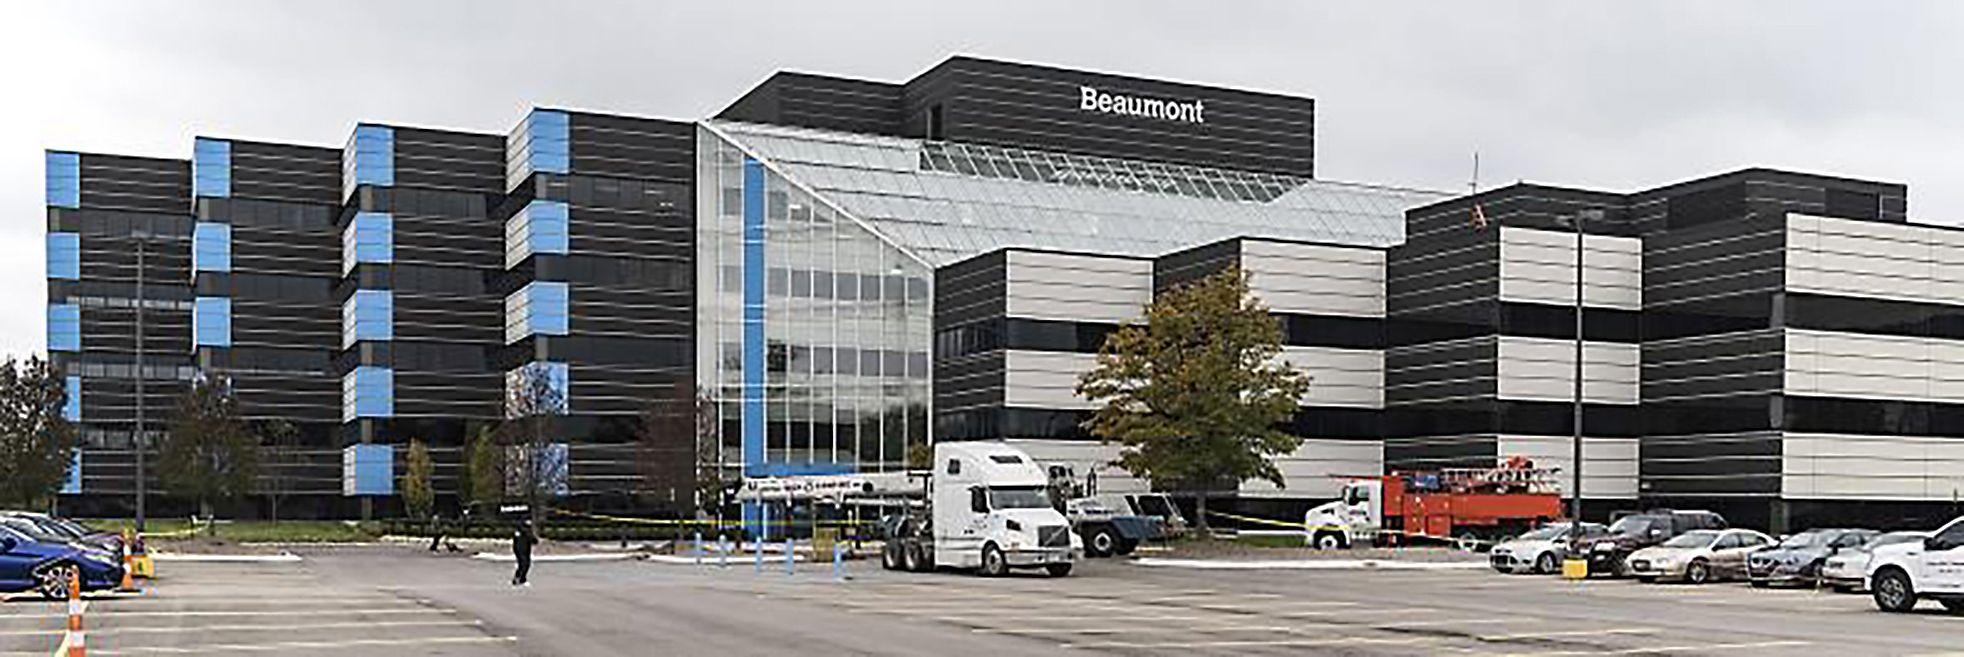 Beaumont Health System Michigan Logo - Beaumont to outsource home health, hospice business in joint venture ...